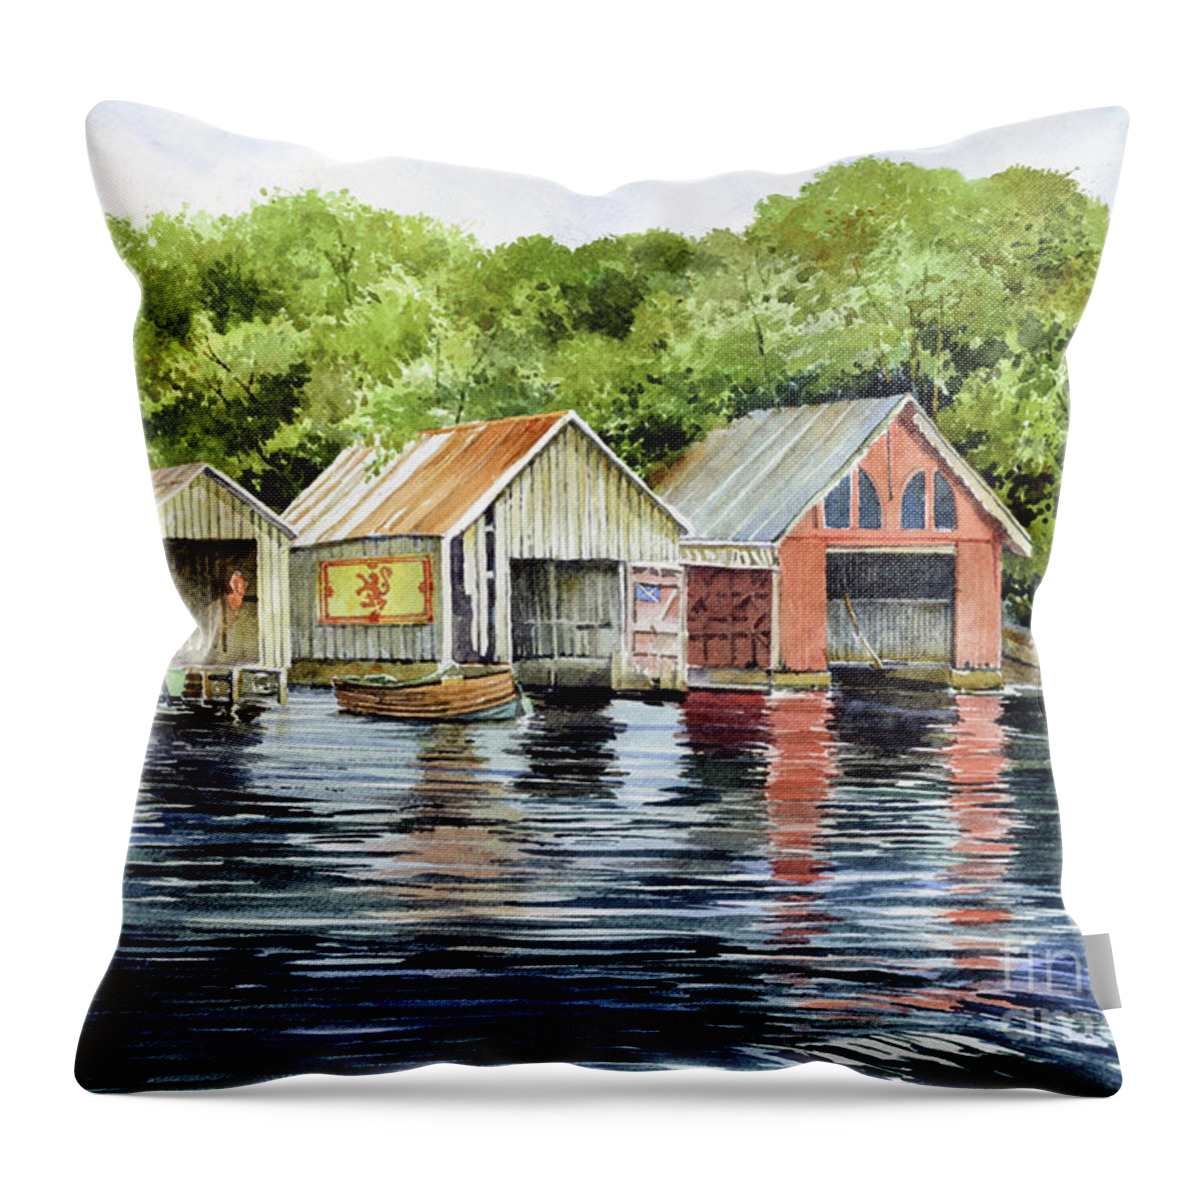 Scotland Throw Pillow featuring the painting Lochness Boathouses by William Band